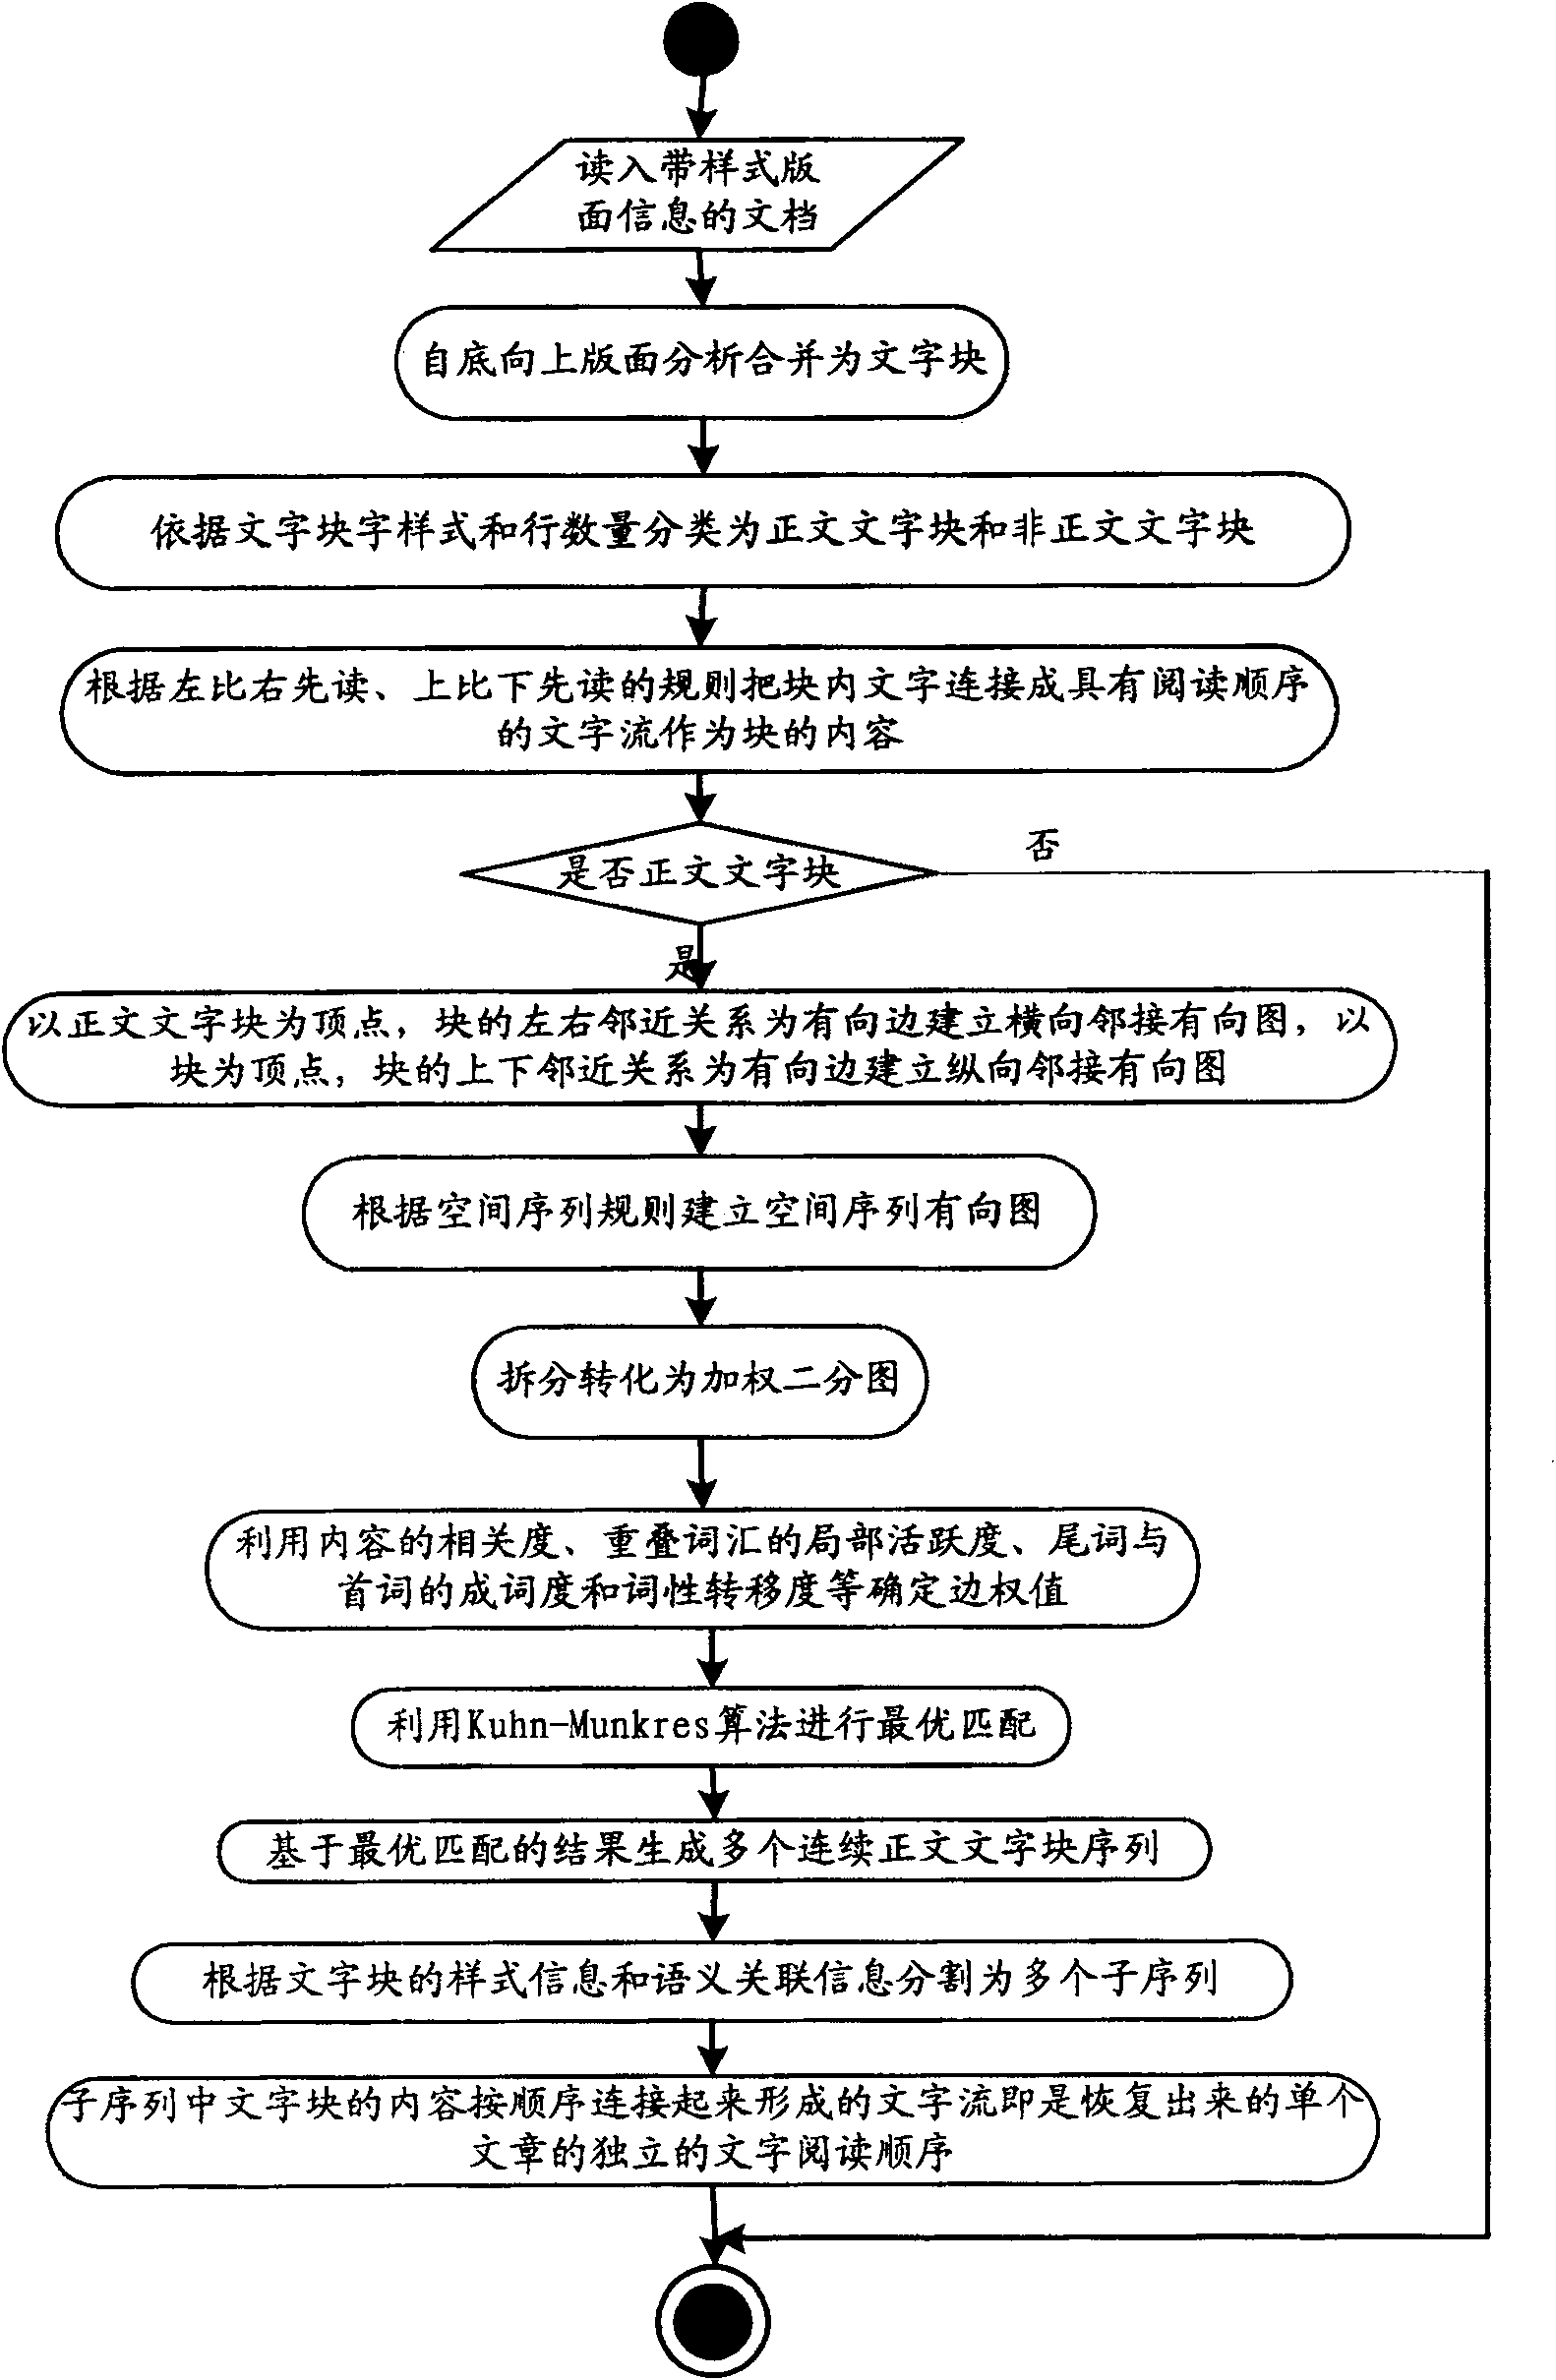 Method for conducting words reading sequence recovery for newspaper pages